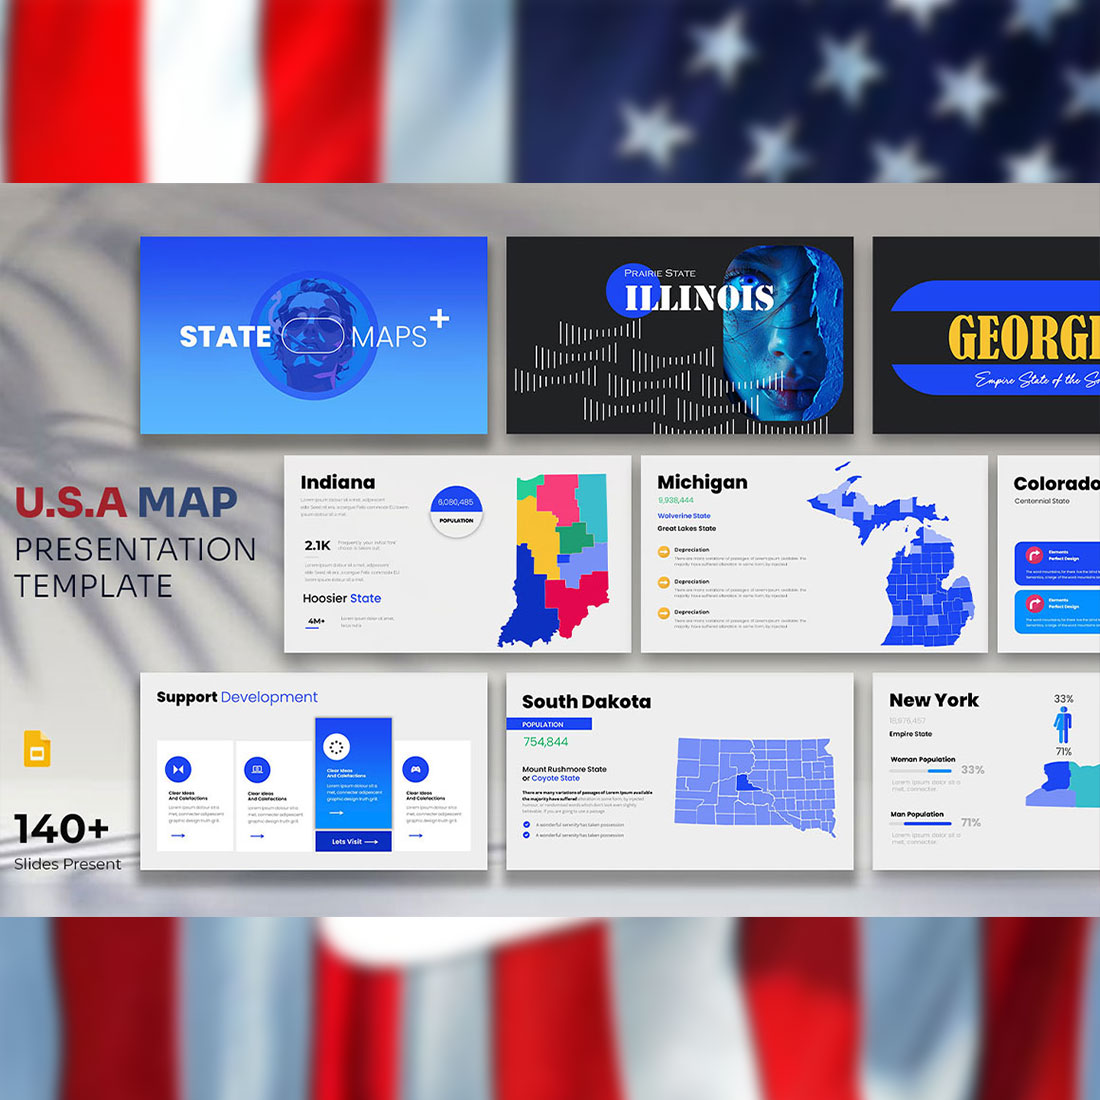 United State Of America All Map Google Template cover image.